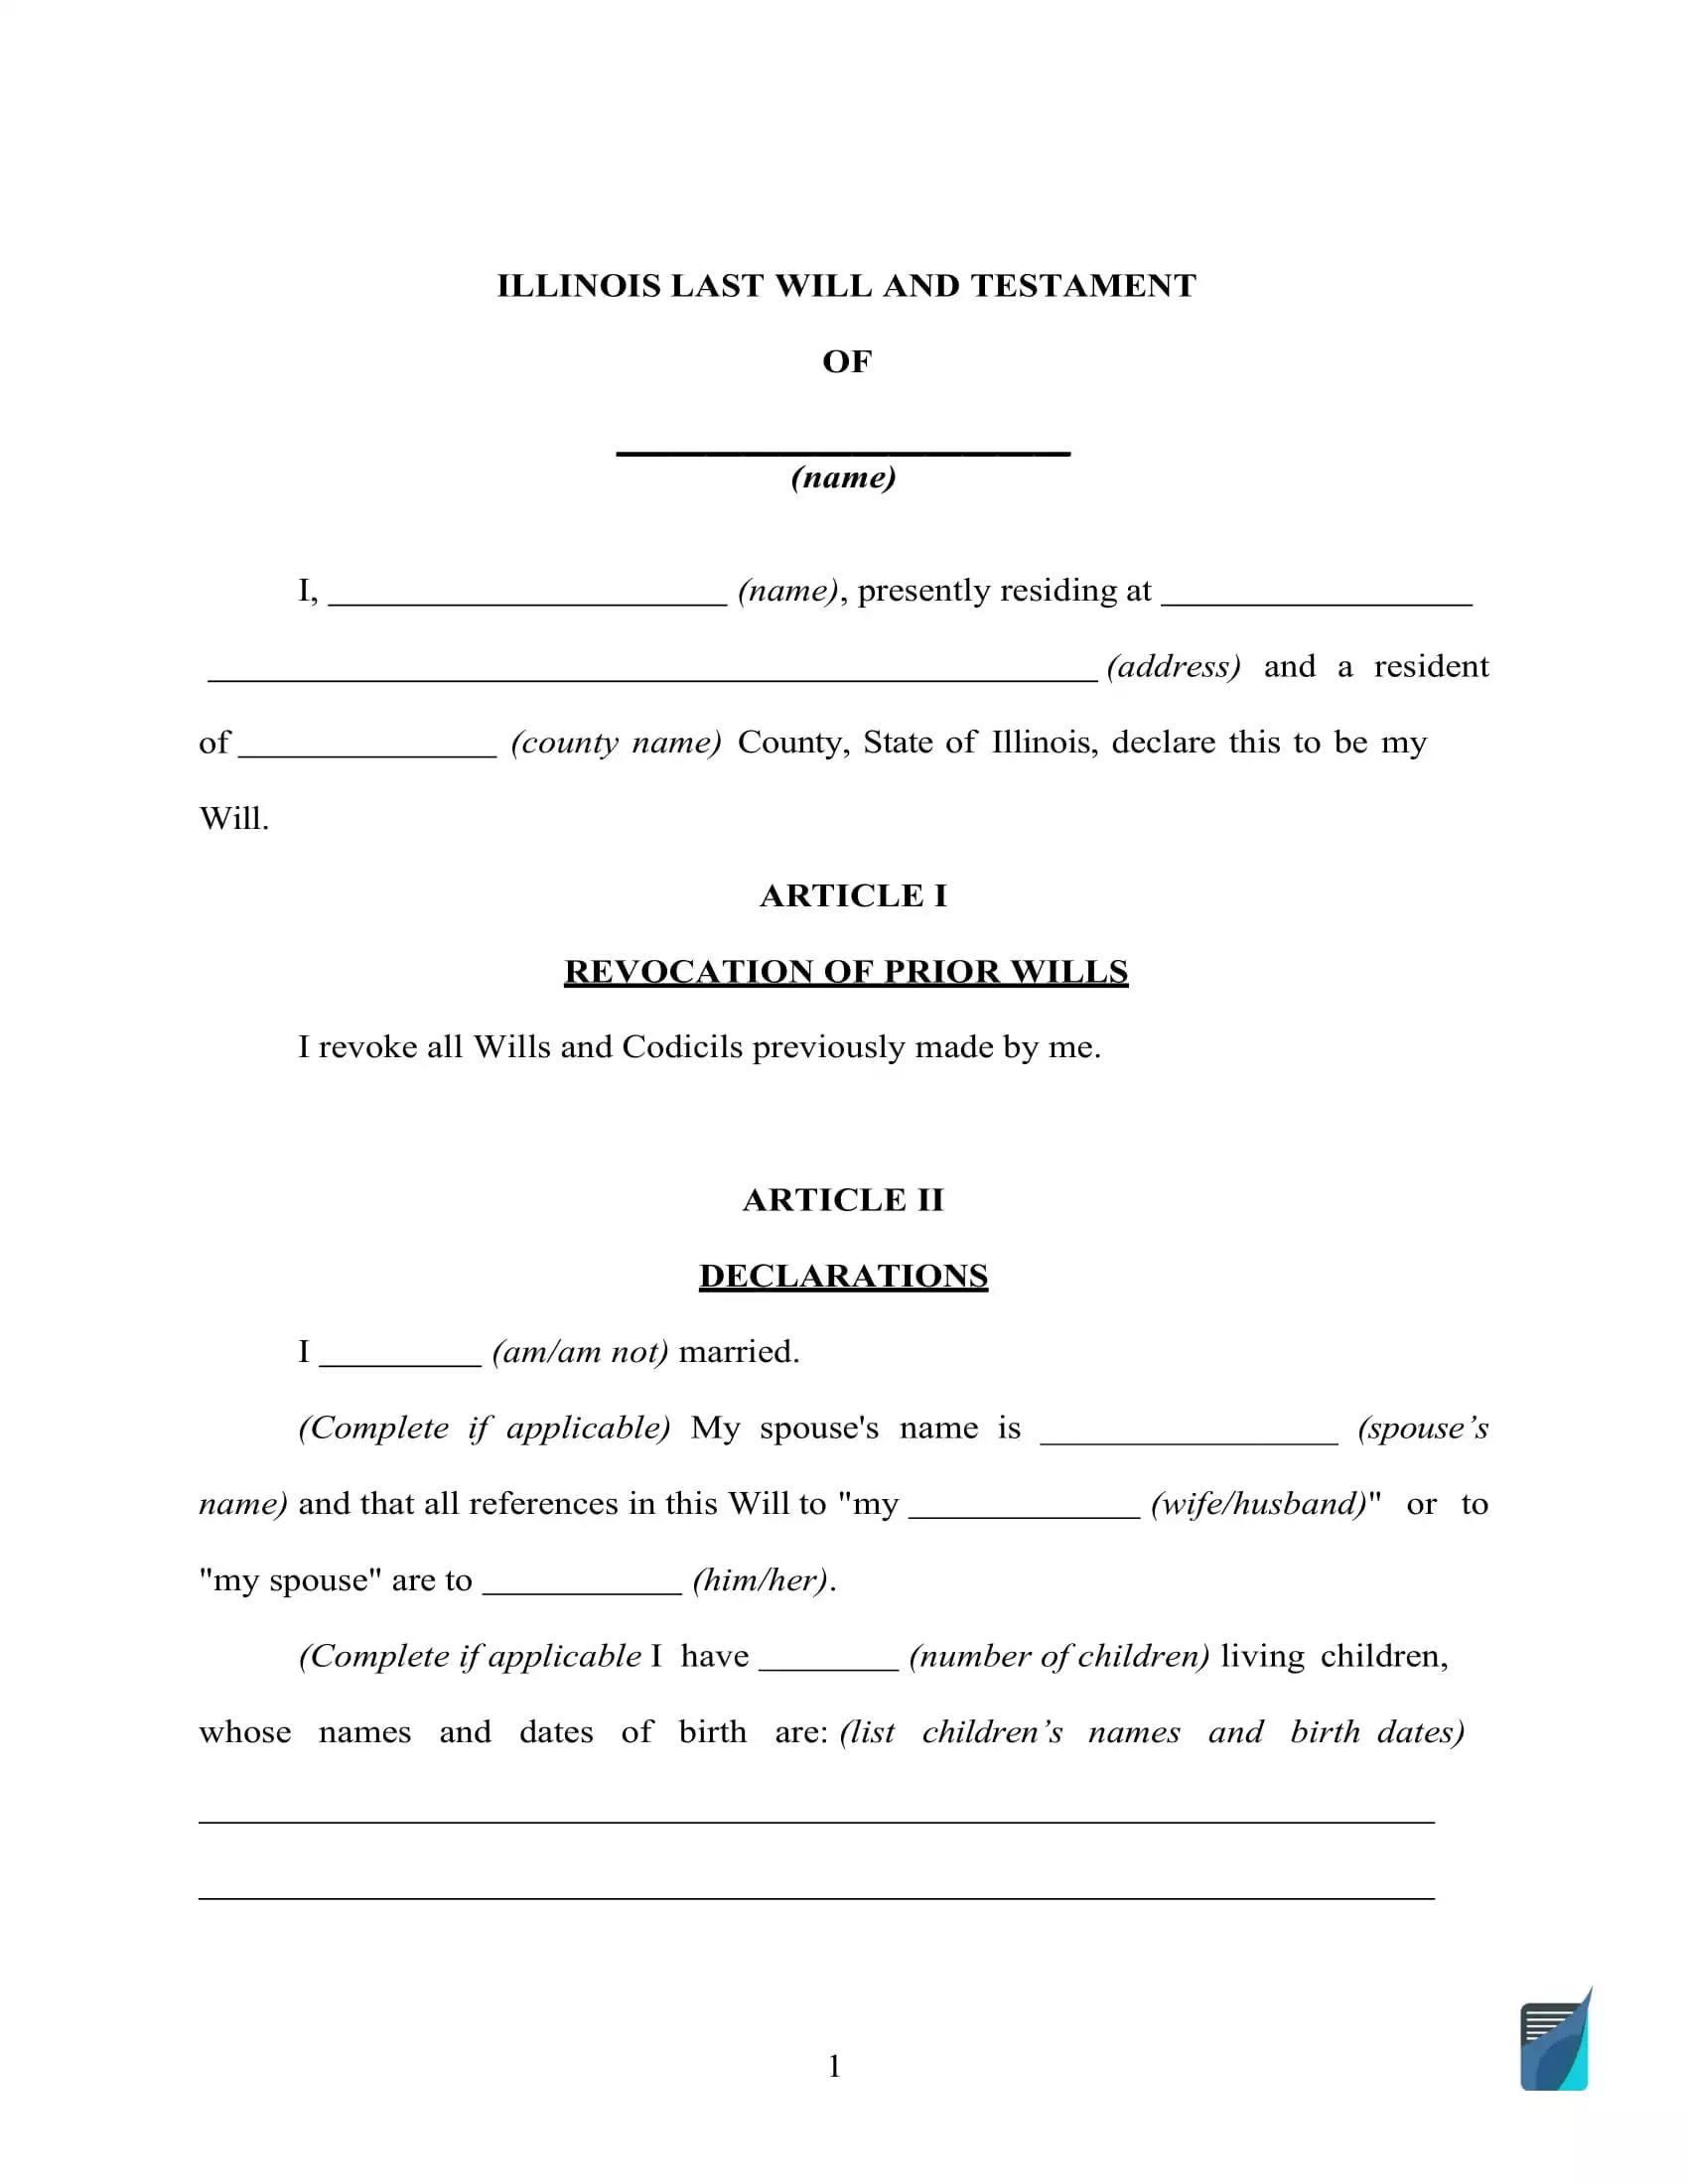 illinois-last-will-and-testament-template